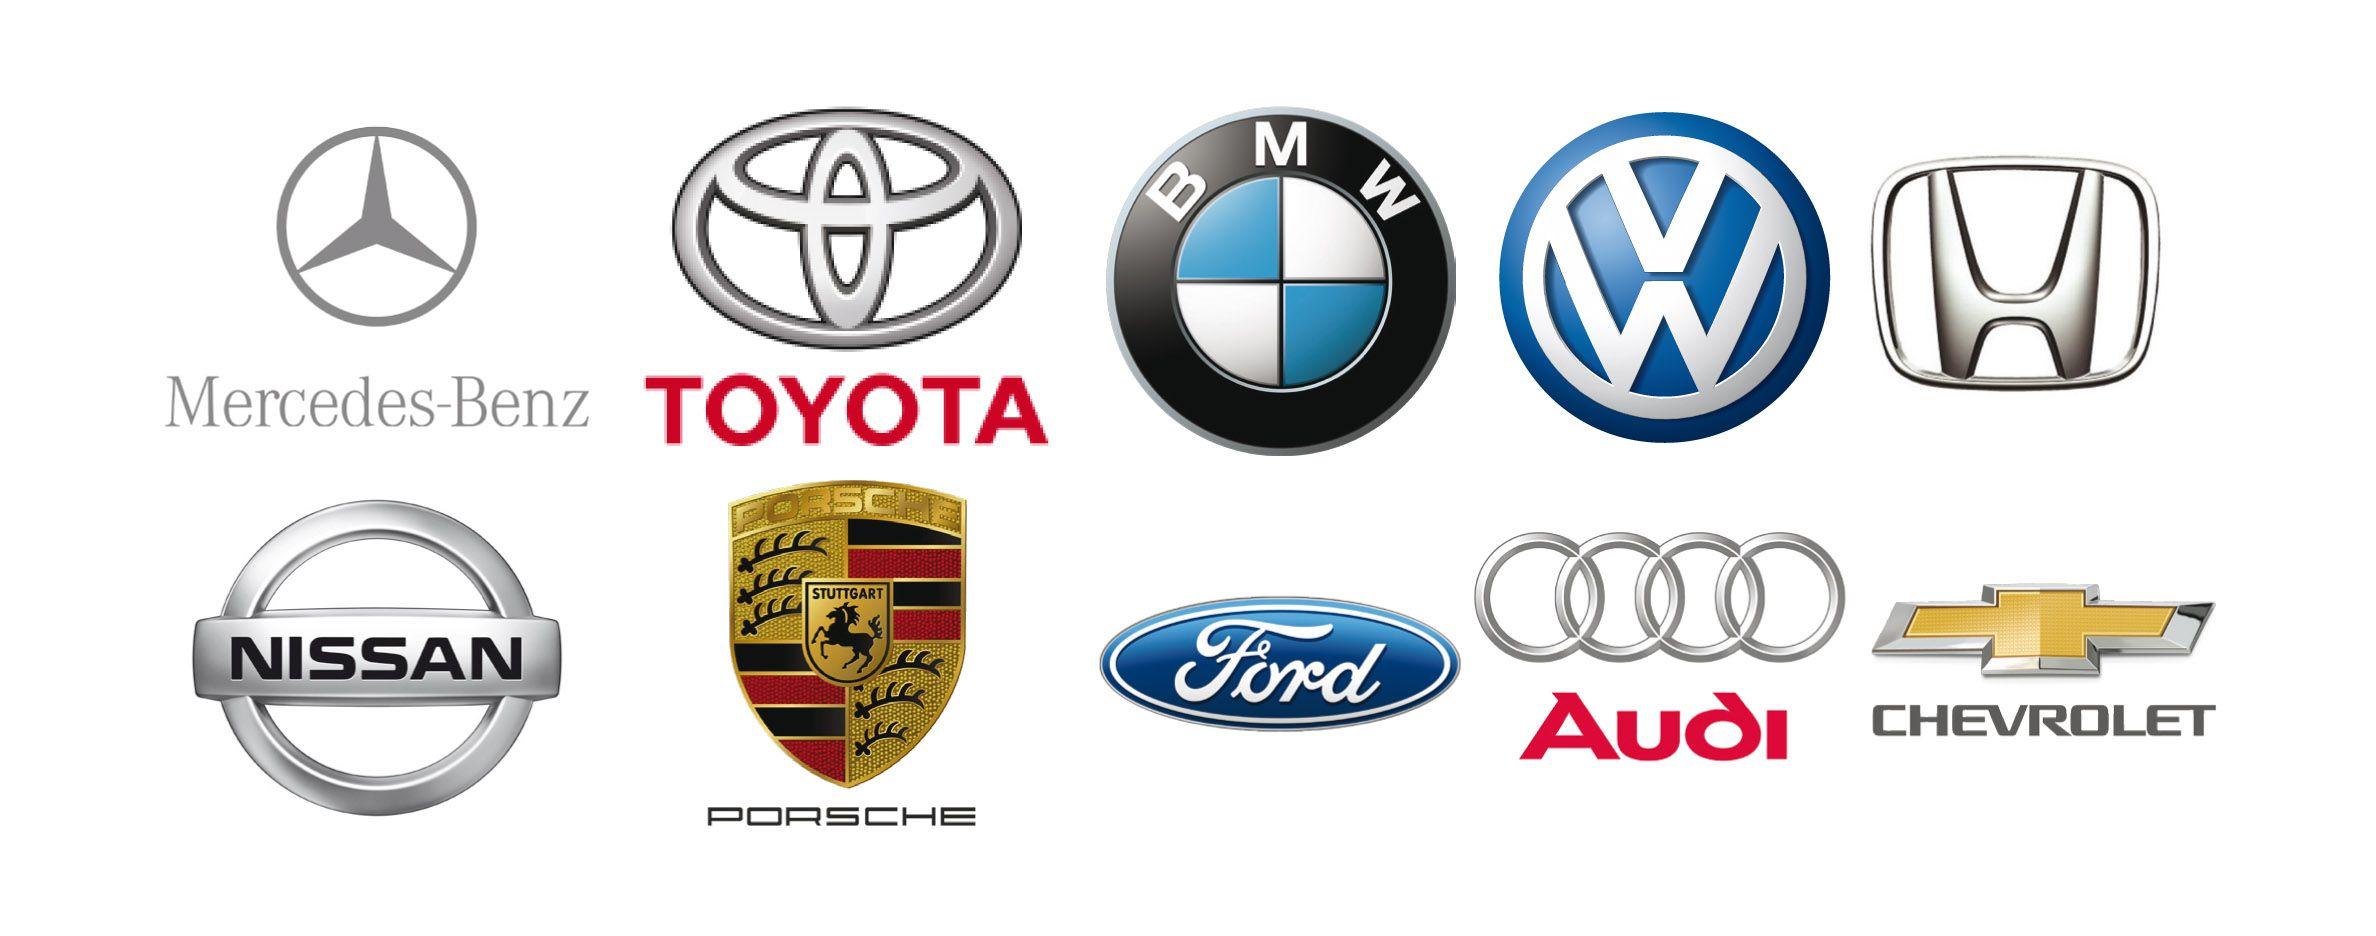 Car Company Logo - Mercedes Benz Is 2018's Most Valuable Car Brand